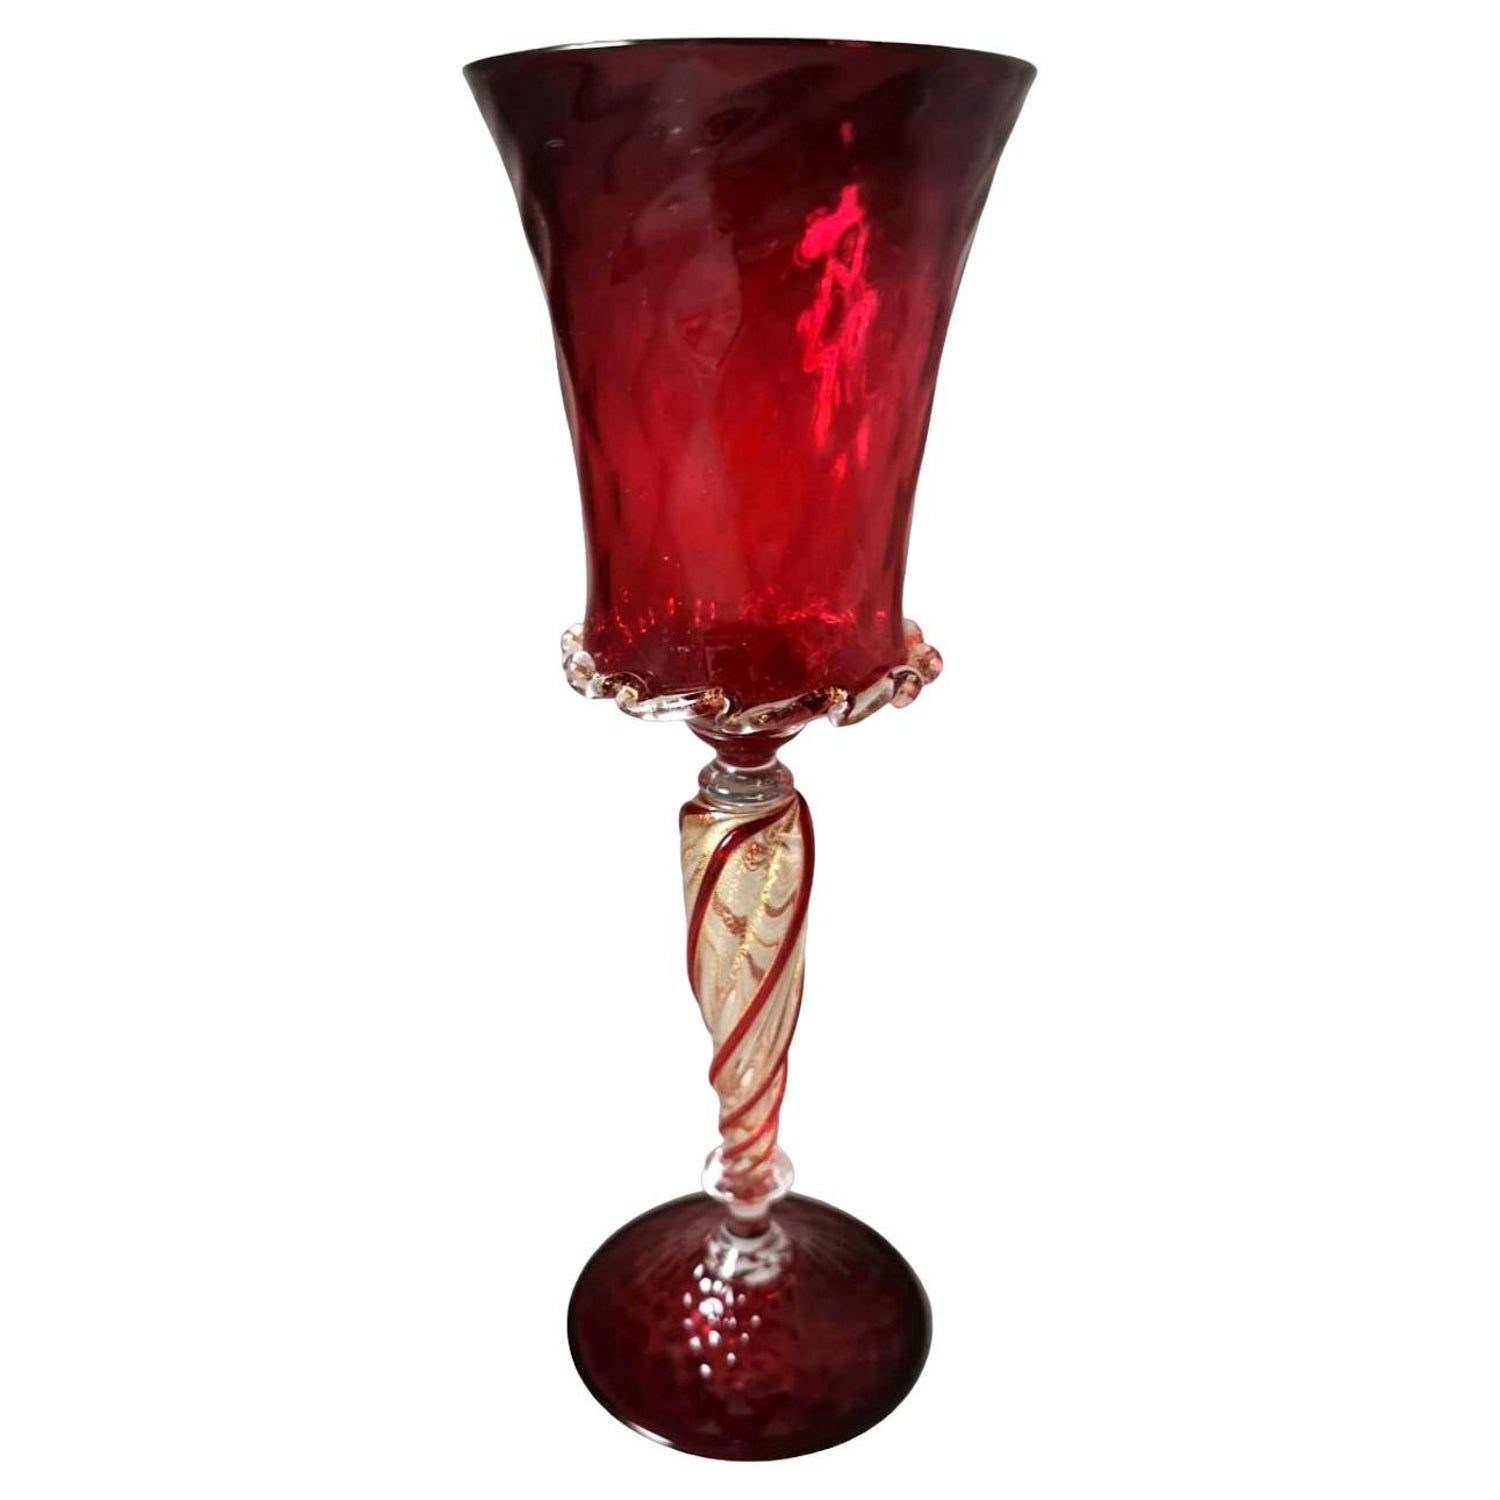 https://a.1stdibscdn.com/murano-glass-goblet-tipetto-ruby-red-blown-glass-with-gold-decoration-for-sale/f_46322/f_361544821694686244722/f_36154482_1694686245052_bg_processed.jpg?width=1500